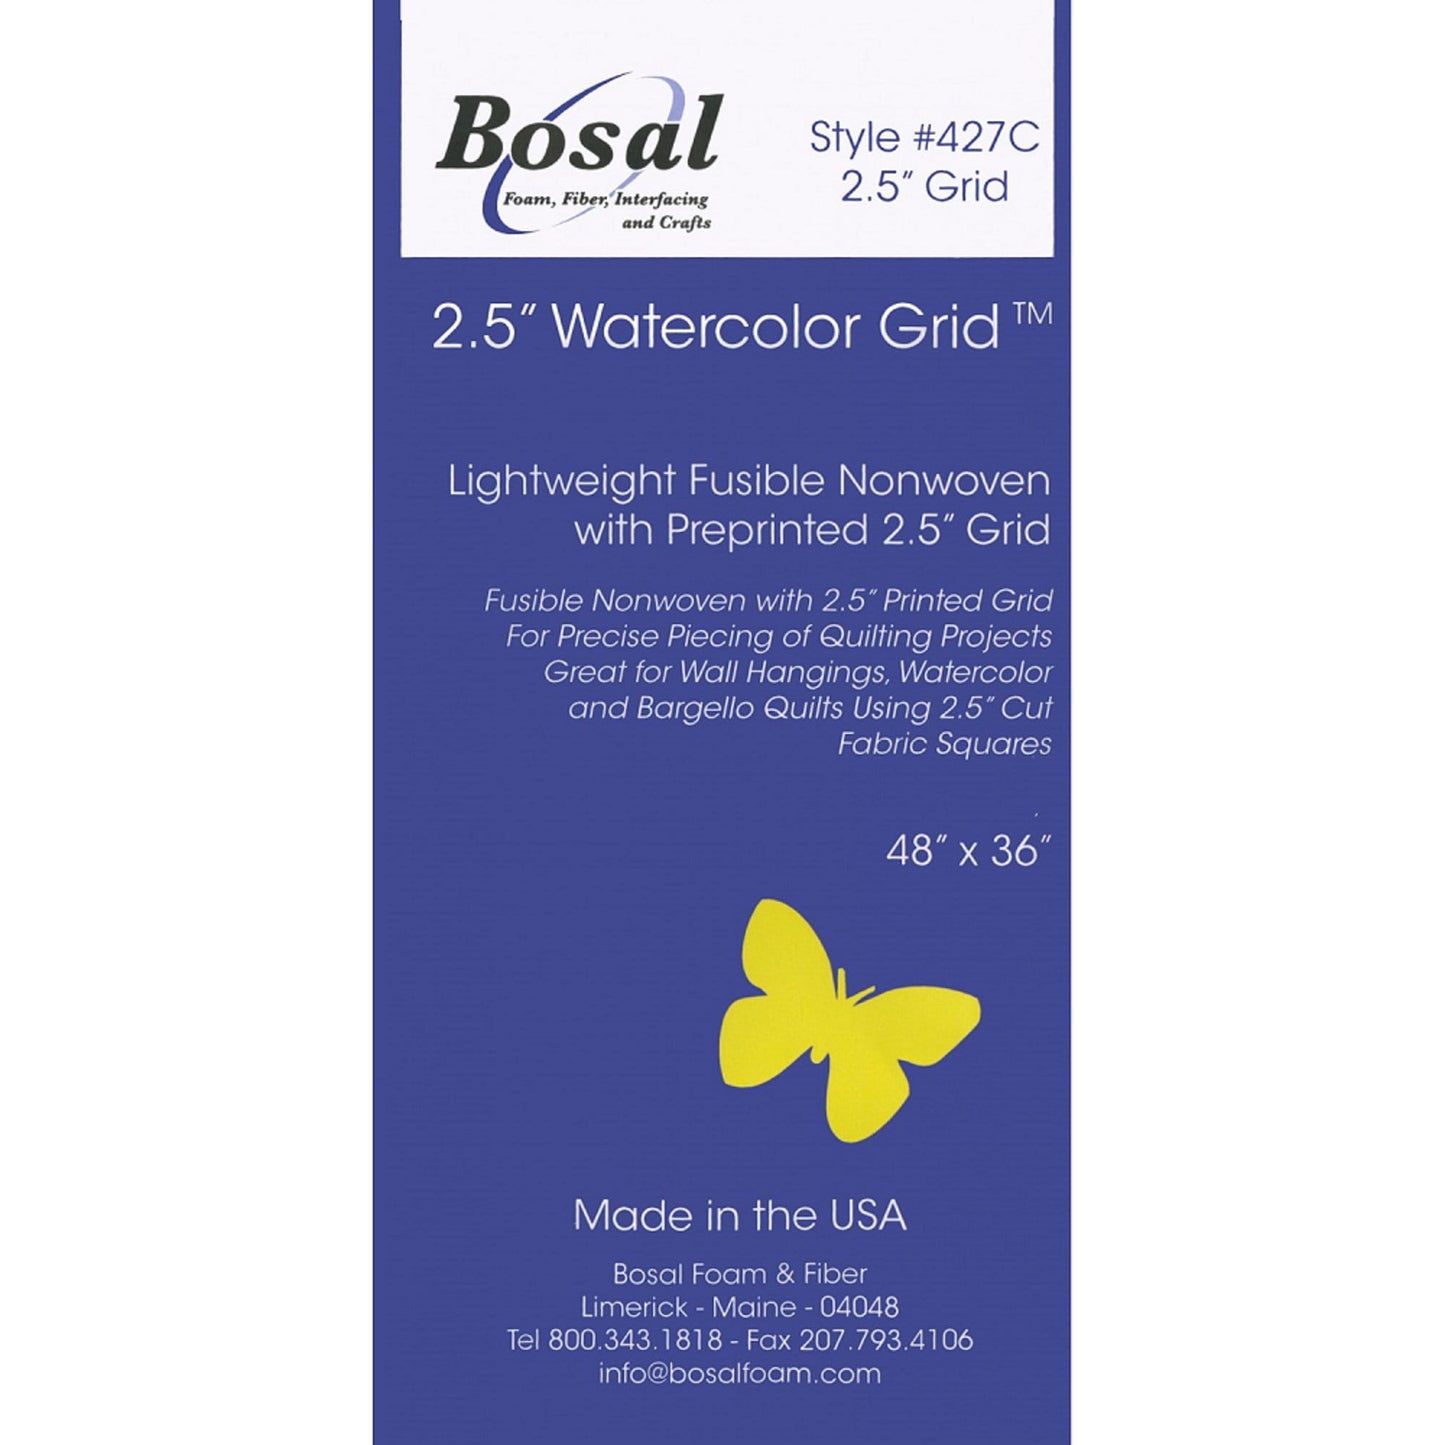 Bosal Quilter’s Grid 2.5” - Lightweight Fusible Nonwoven Interfacing with Preprinted 2.5” grid - 36” x 48” - Watercolor or Bargello Quilting